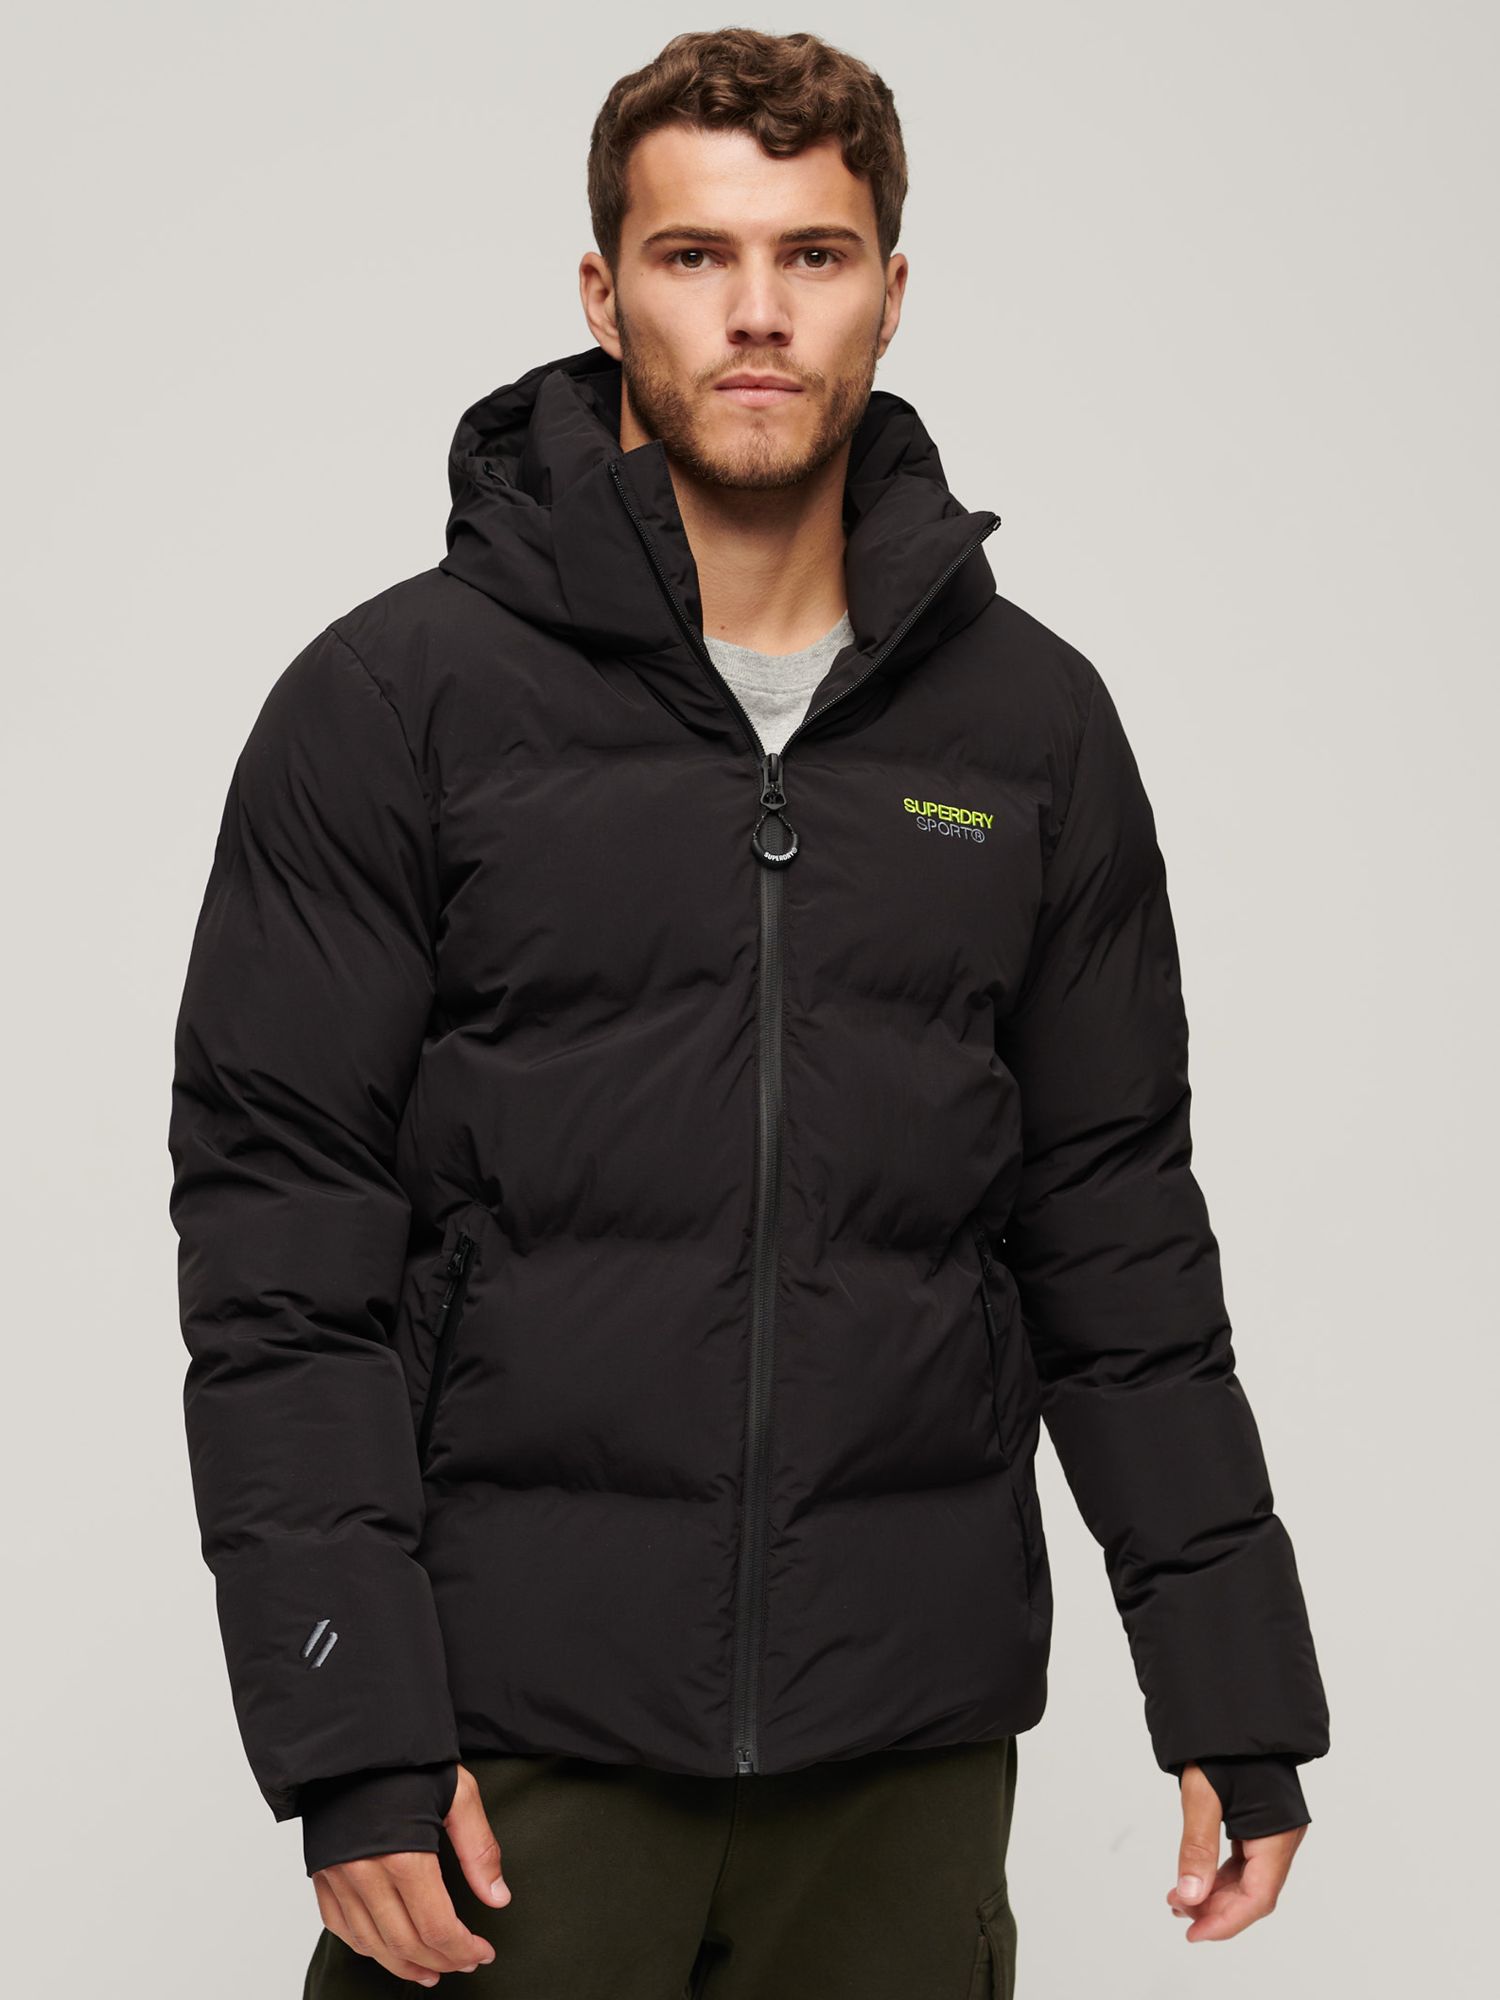 Superdry Hooded Boxy Puffer Jacket, Black at John Lewis & Partners